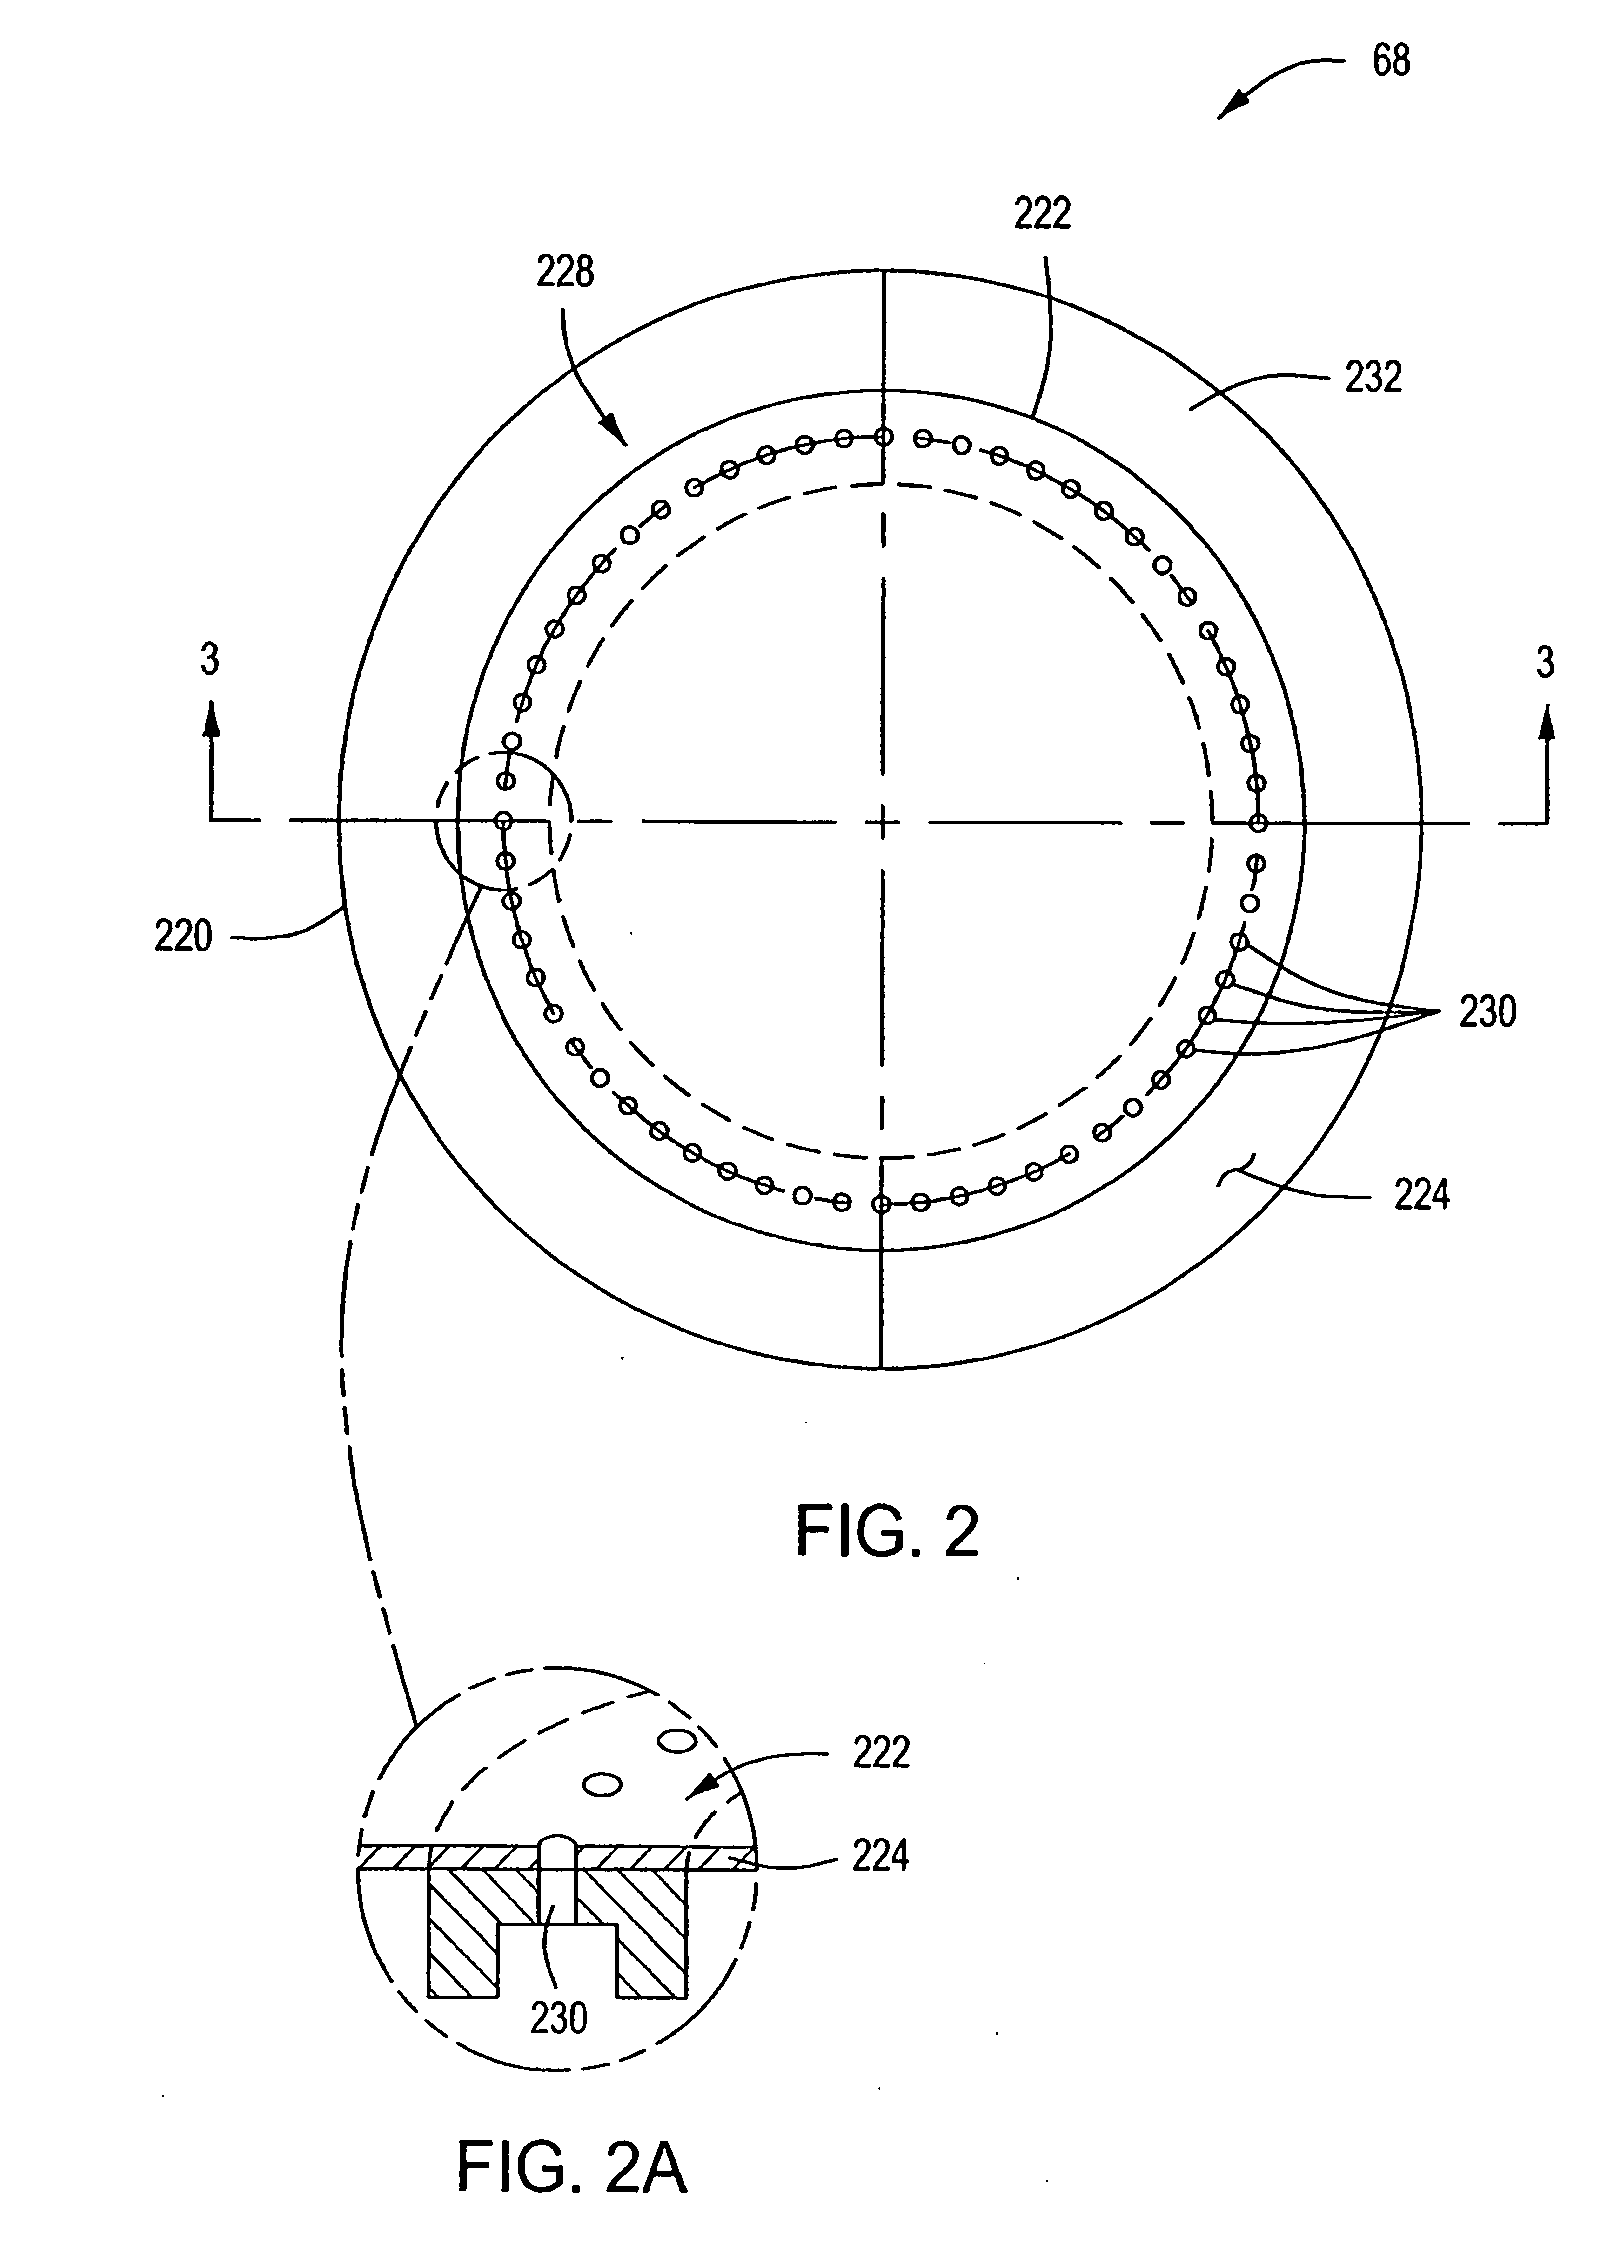 Method for refurbishing an electrostatic chuck with reduced plasma penetration and arcing